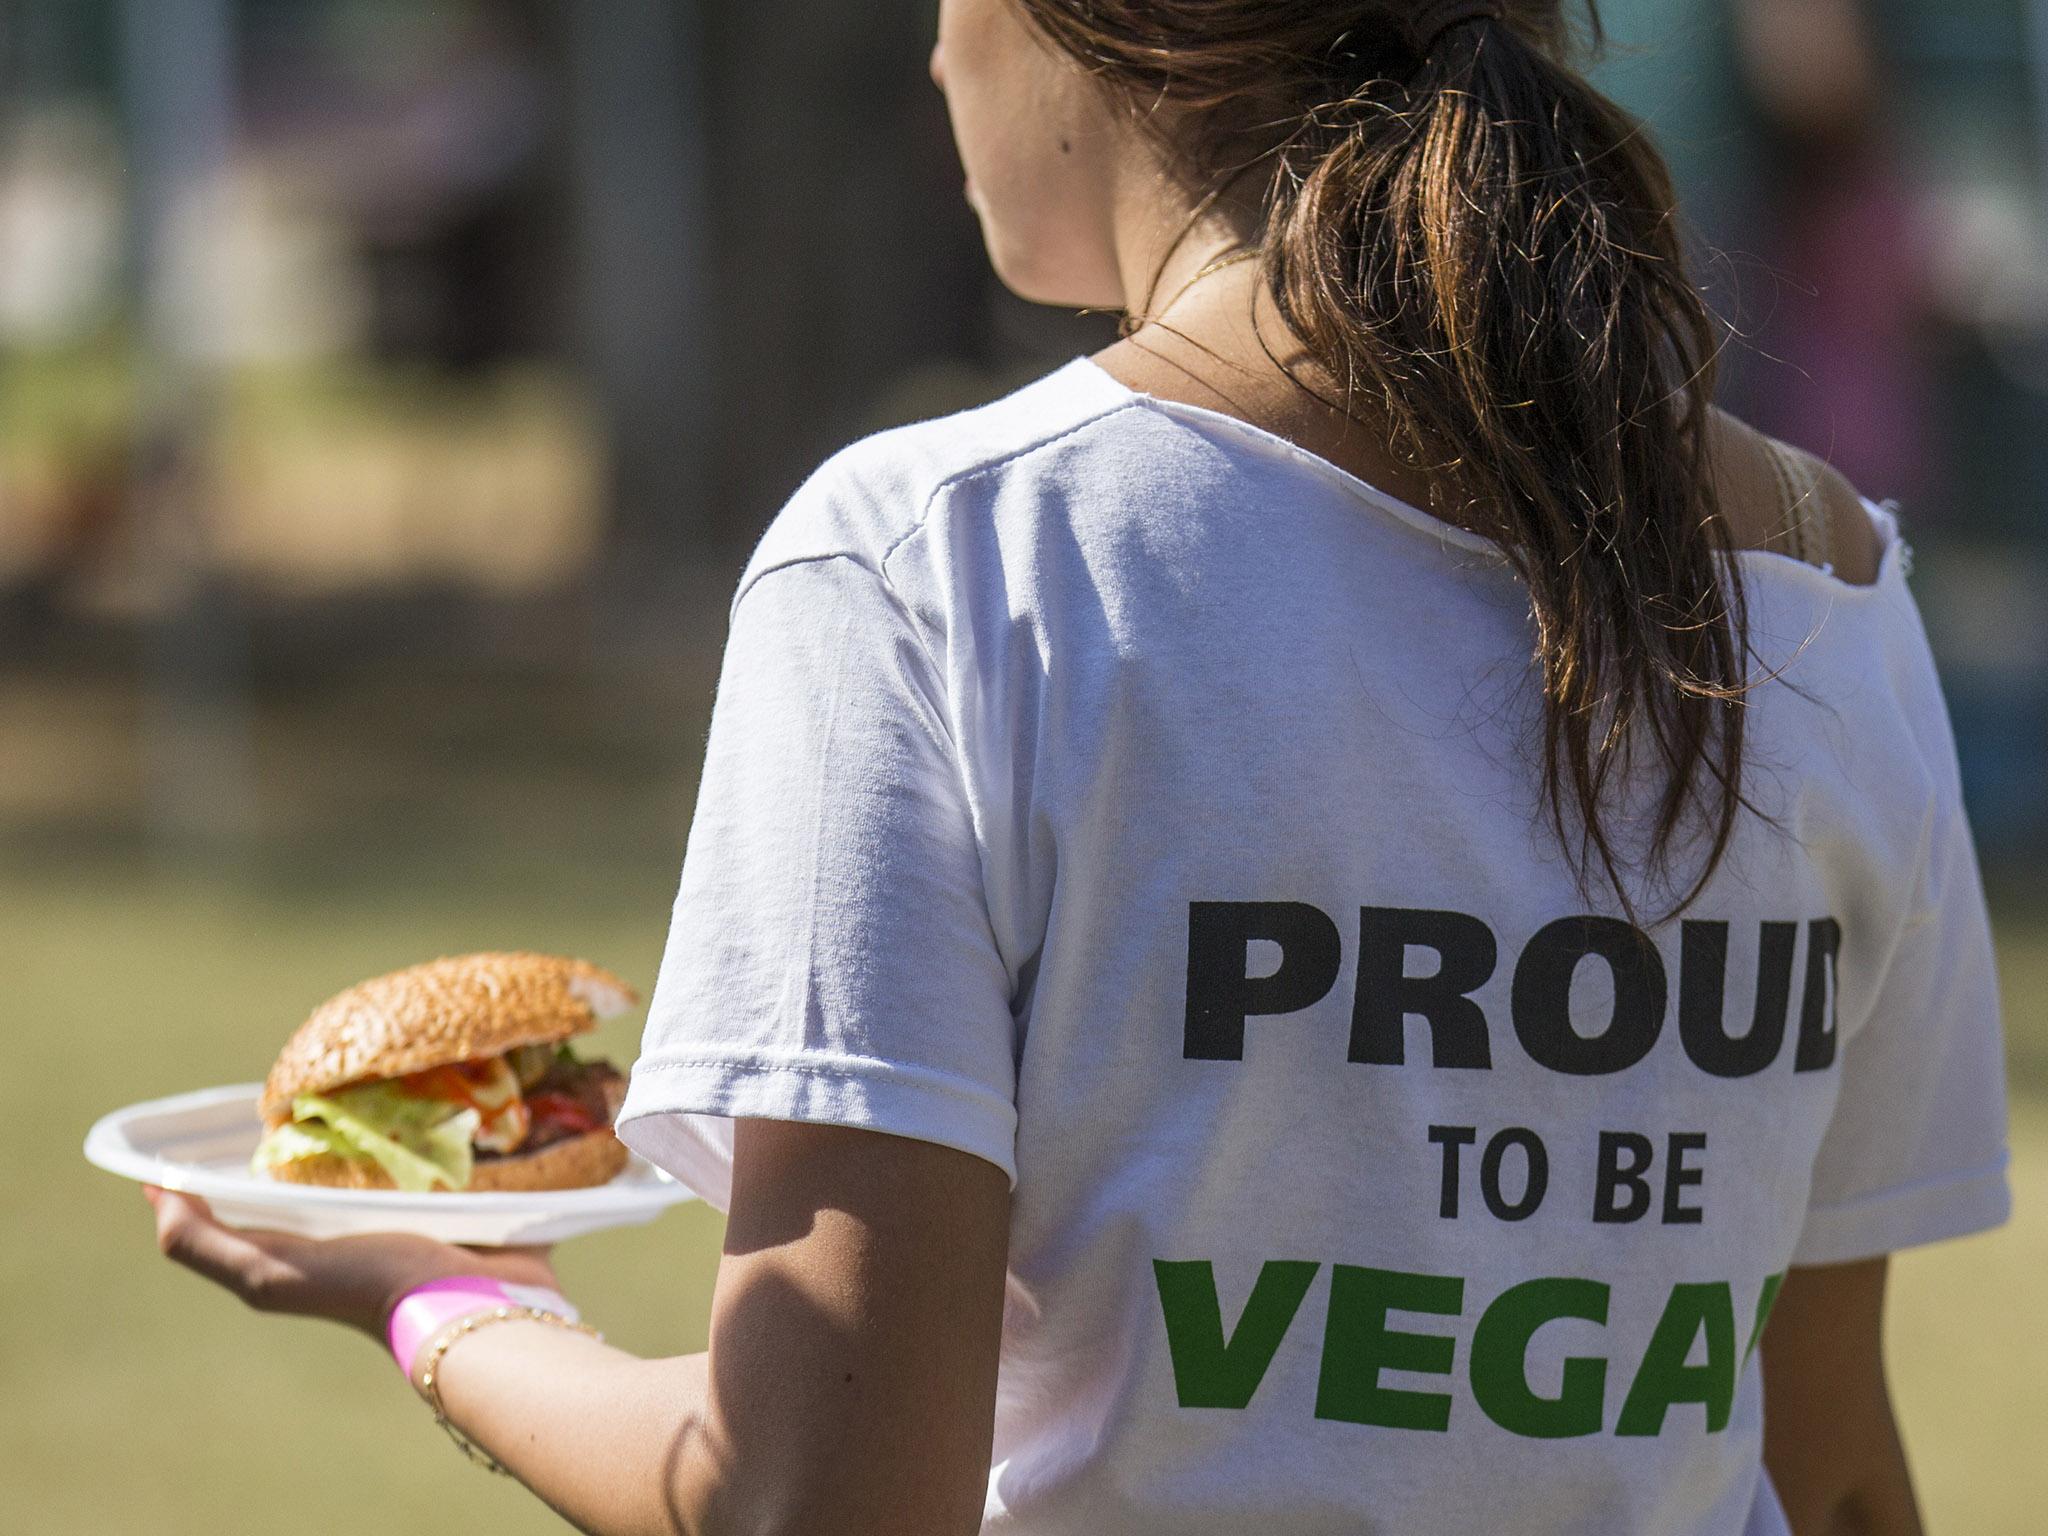 The survey also found that 60 per cent of vegans and 40 per cent of vegetarians had adopted the lifestyle in just the last five years, as it has become increasingly trendy